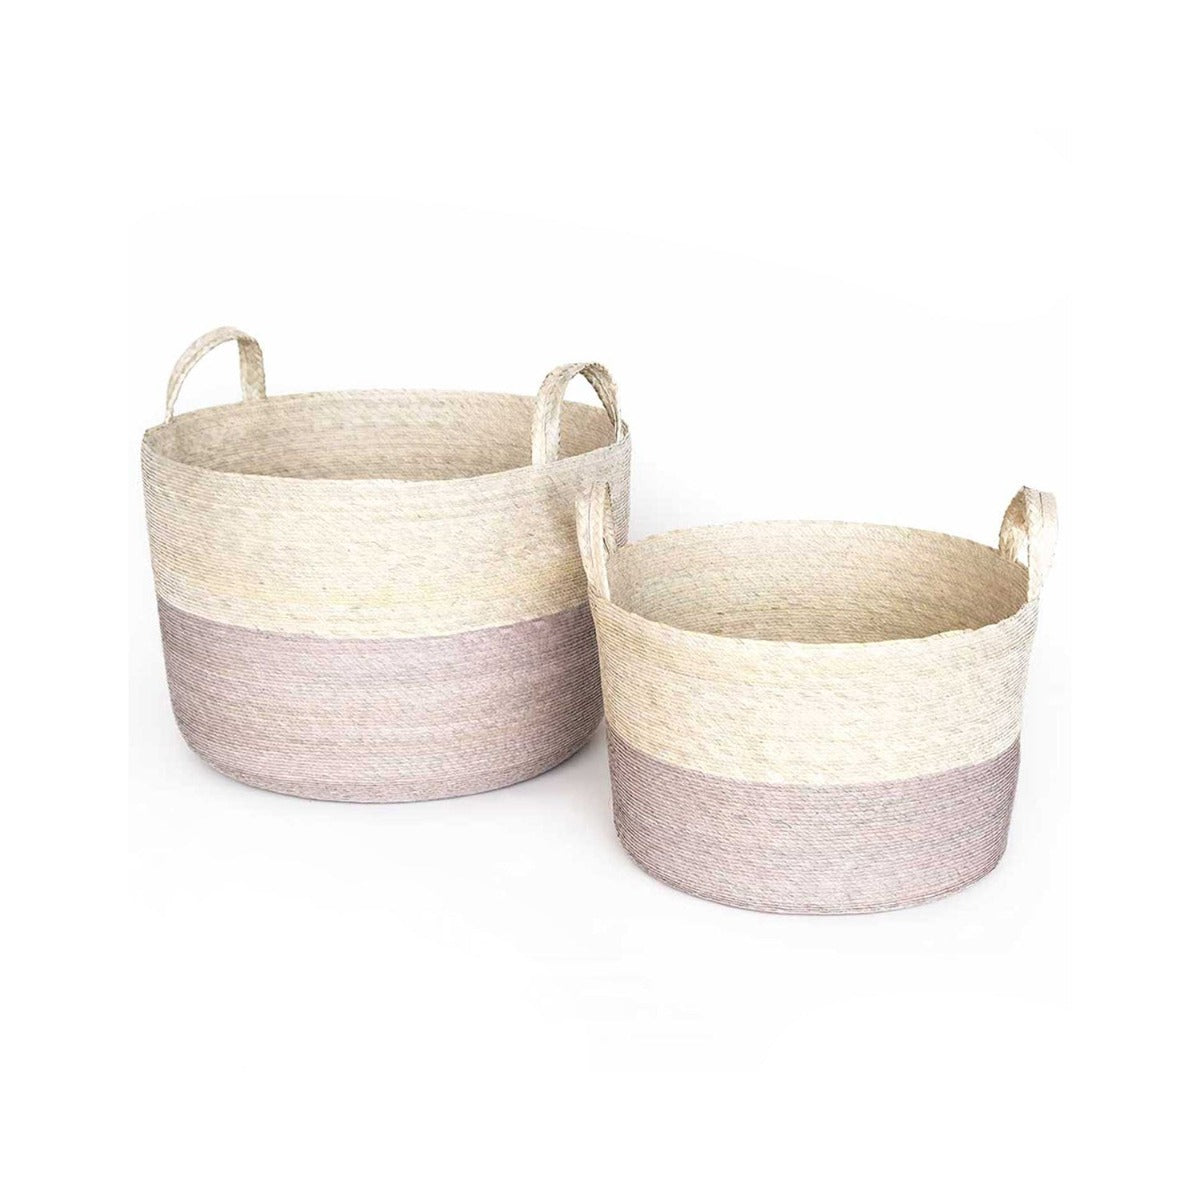 Handmade Round Basket with Handles in Arena Oatmeal